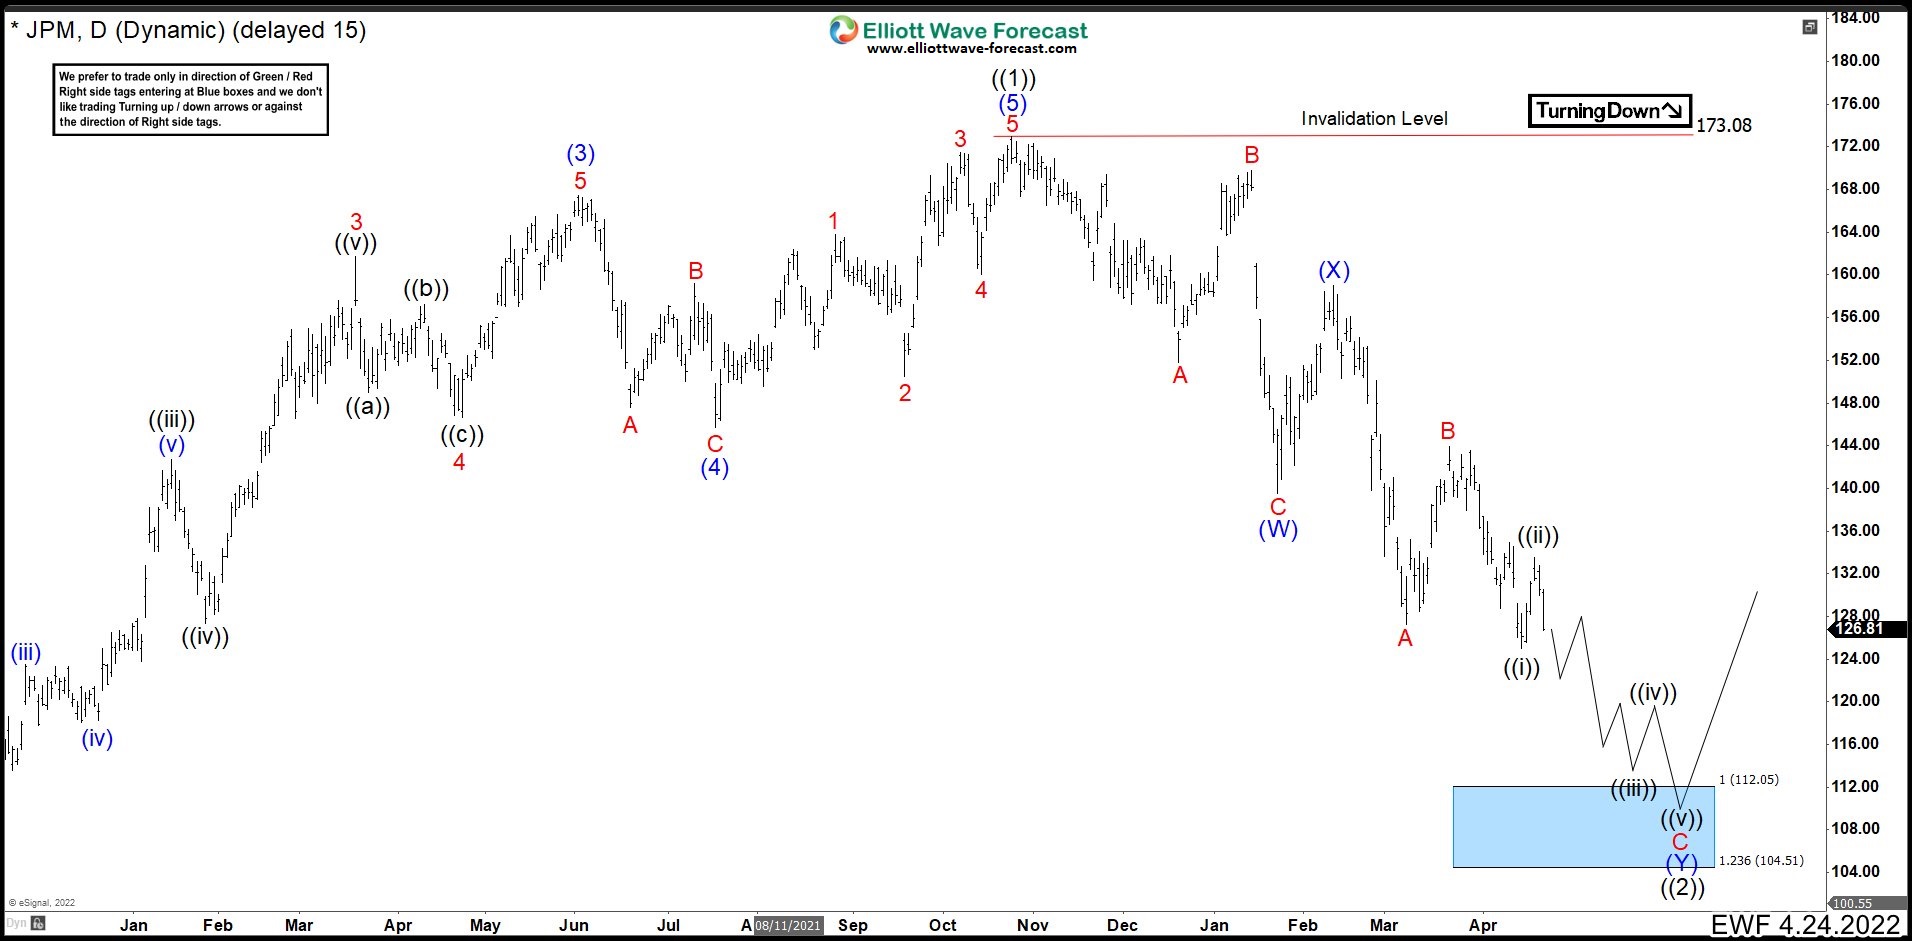 Elliott Wave Forecast: JPMorgan Stock (JPM) Could Be Ready For A Rally In Next Quarter